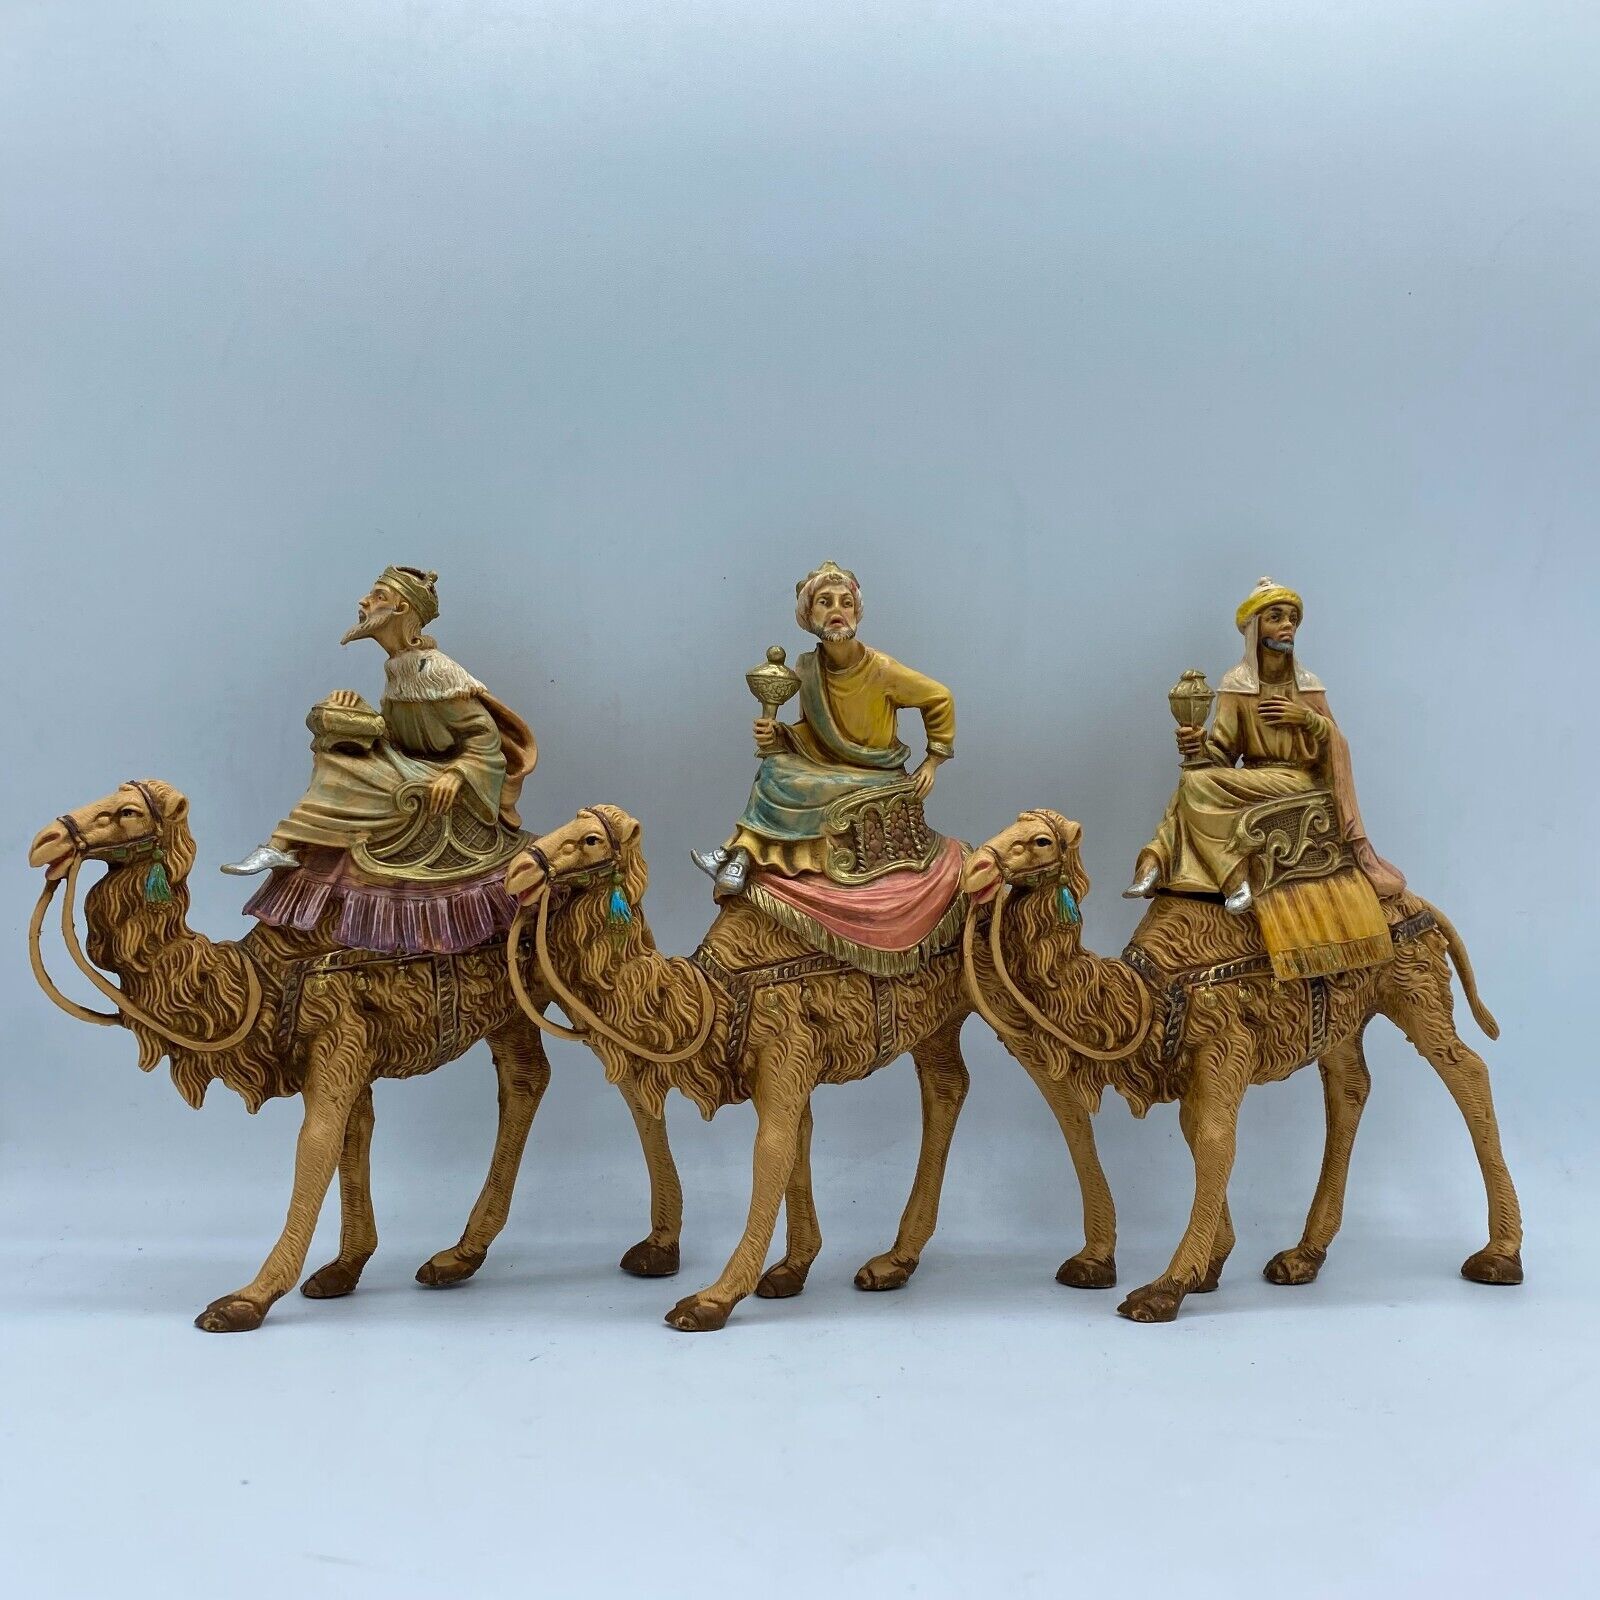 1992  Fontanini Nativity Three Kings on Camels 3 Wise Men  - Italy